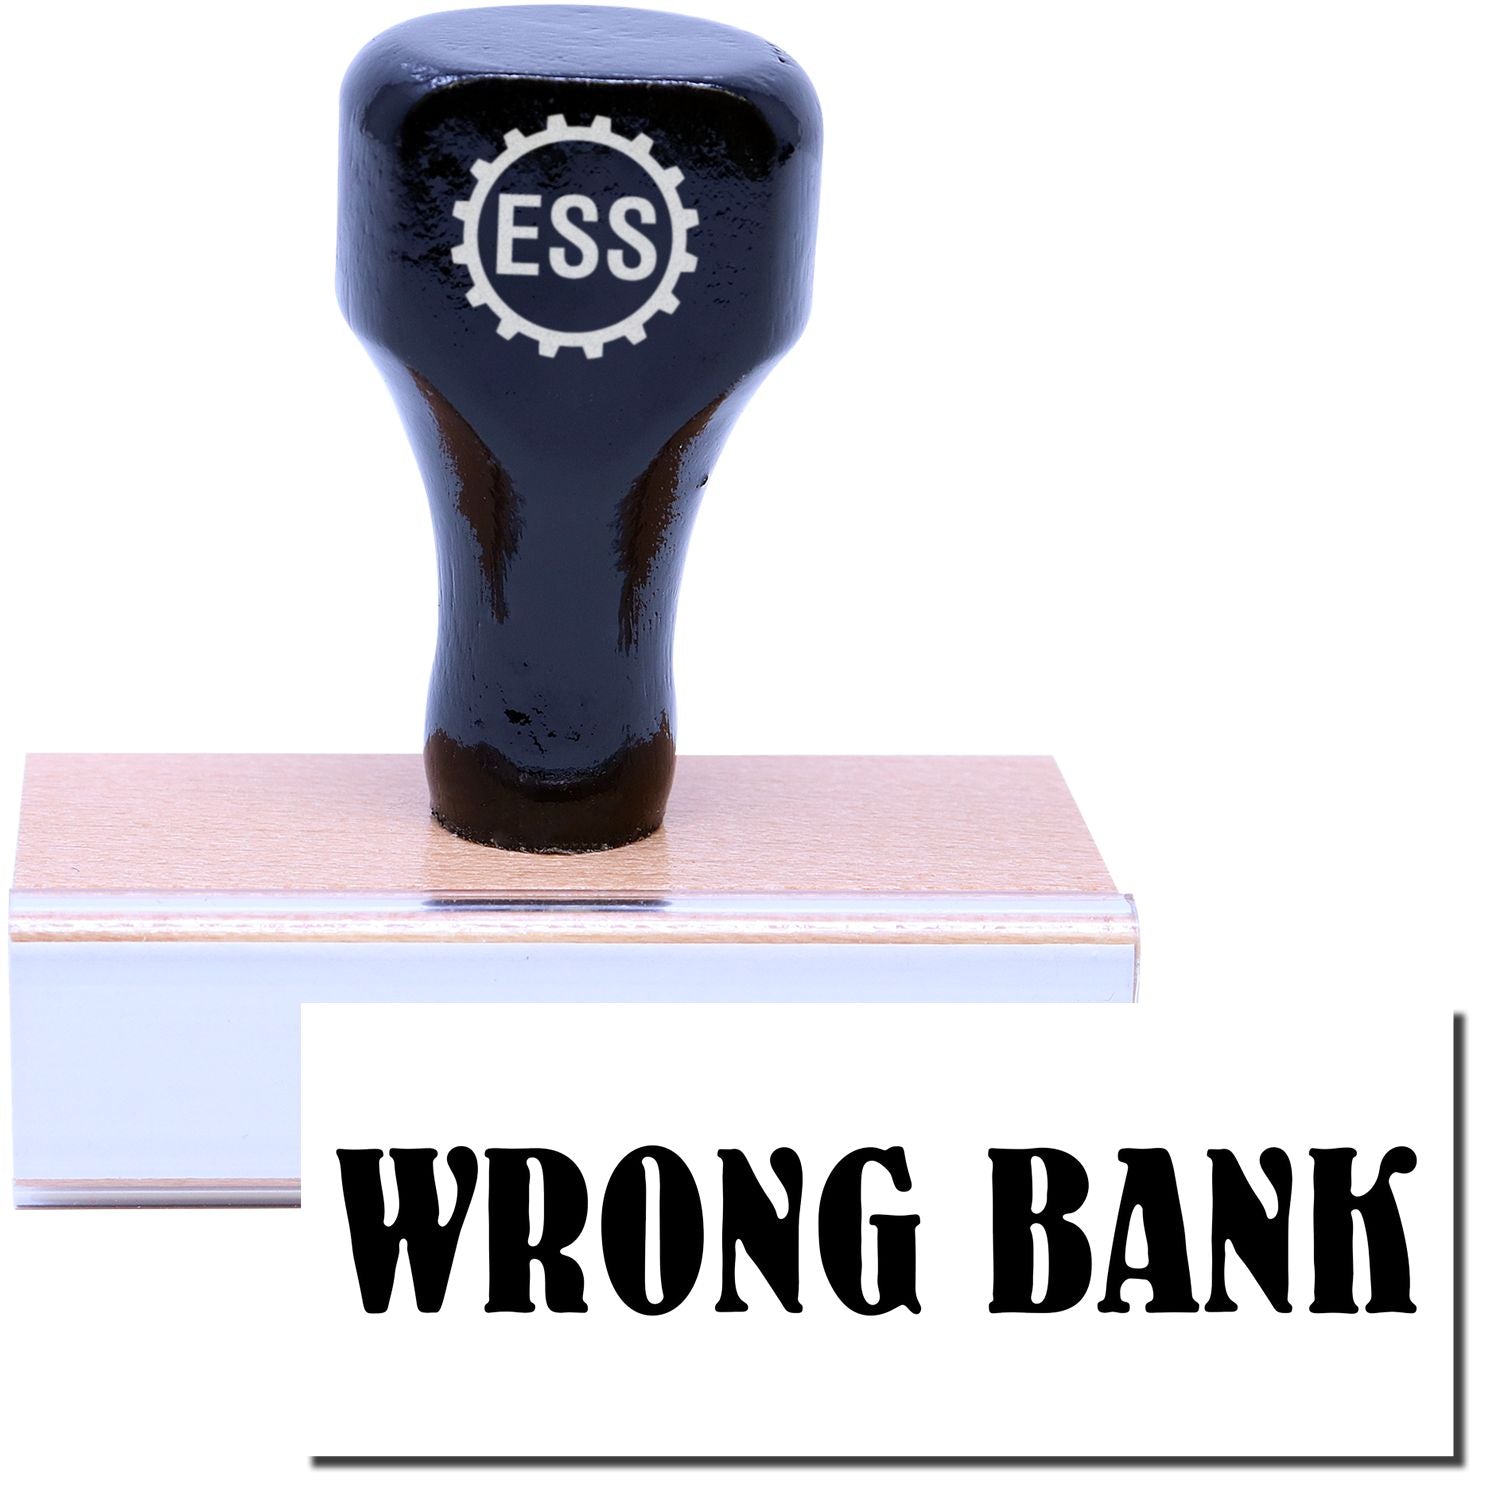 A stock office rubber stamp with a stamped image showing how the text "WRONG BANK" in a large font is displayed after stamping.